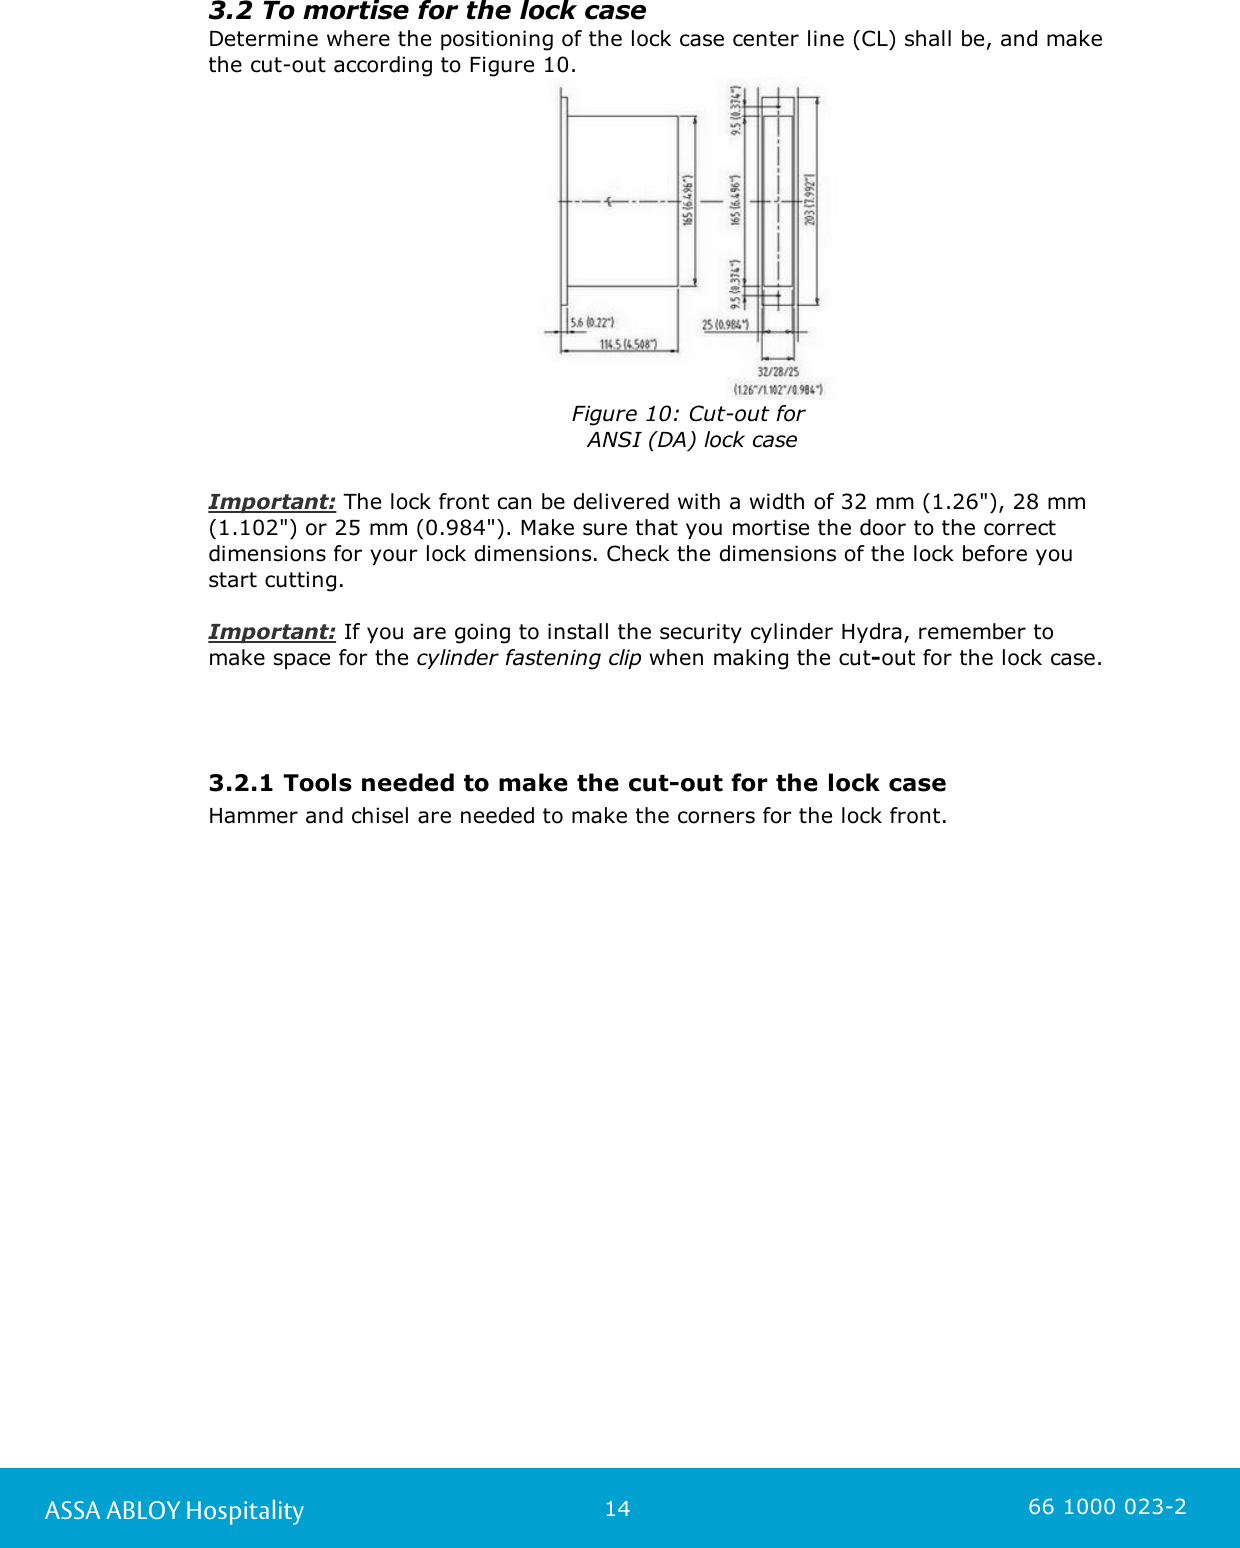 14ASSA ABLOY Hospitality 66 1000 023-23.2 To mortise for the lock caseDetermine where the positioning of the lock case center line (CL) shall be, and makethe cut-out according to Figure 10.                    Figure 10: Cut-out for ANSI (DA) lock caseImportant: The lock front can be delivered with a width of 32 mm (1.26&quot;), 28 mm (1.102&quot;) or 25 mm (0.984&quot;). Make sure that you mortise the door to the correctdimensions for your lock dimensions. Check the dimensions of the lock before you start cutting.Important: If you are going to install the security cylinder Hydra, remember to make space for the cylinder fastening clip when making the cut-out for the lock case.  3.2.1 Tools needed to make the cut-out for the lock caseHammer and chisel are needed to make the corners for the lock front.